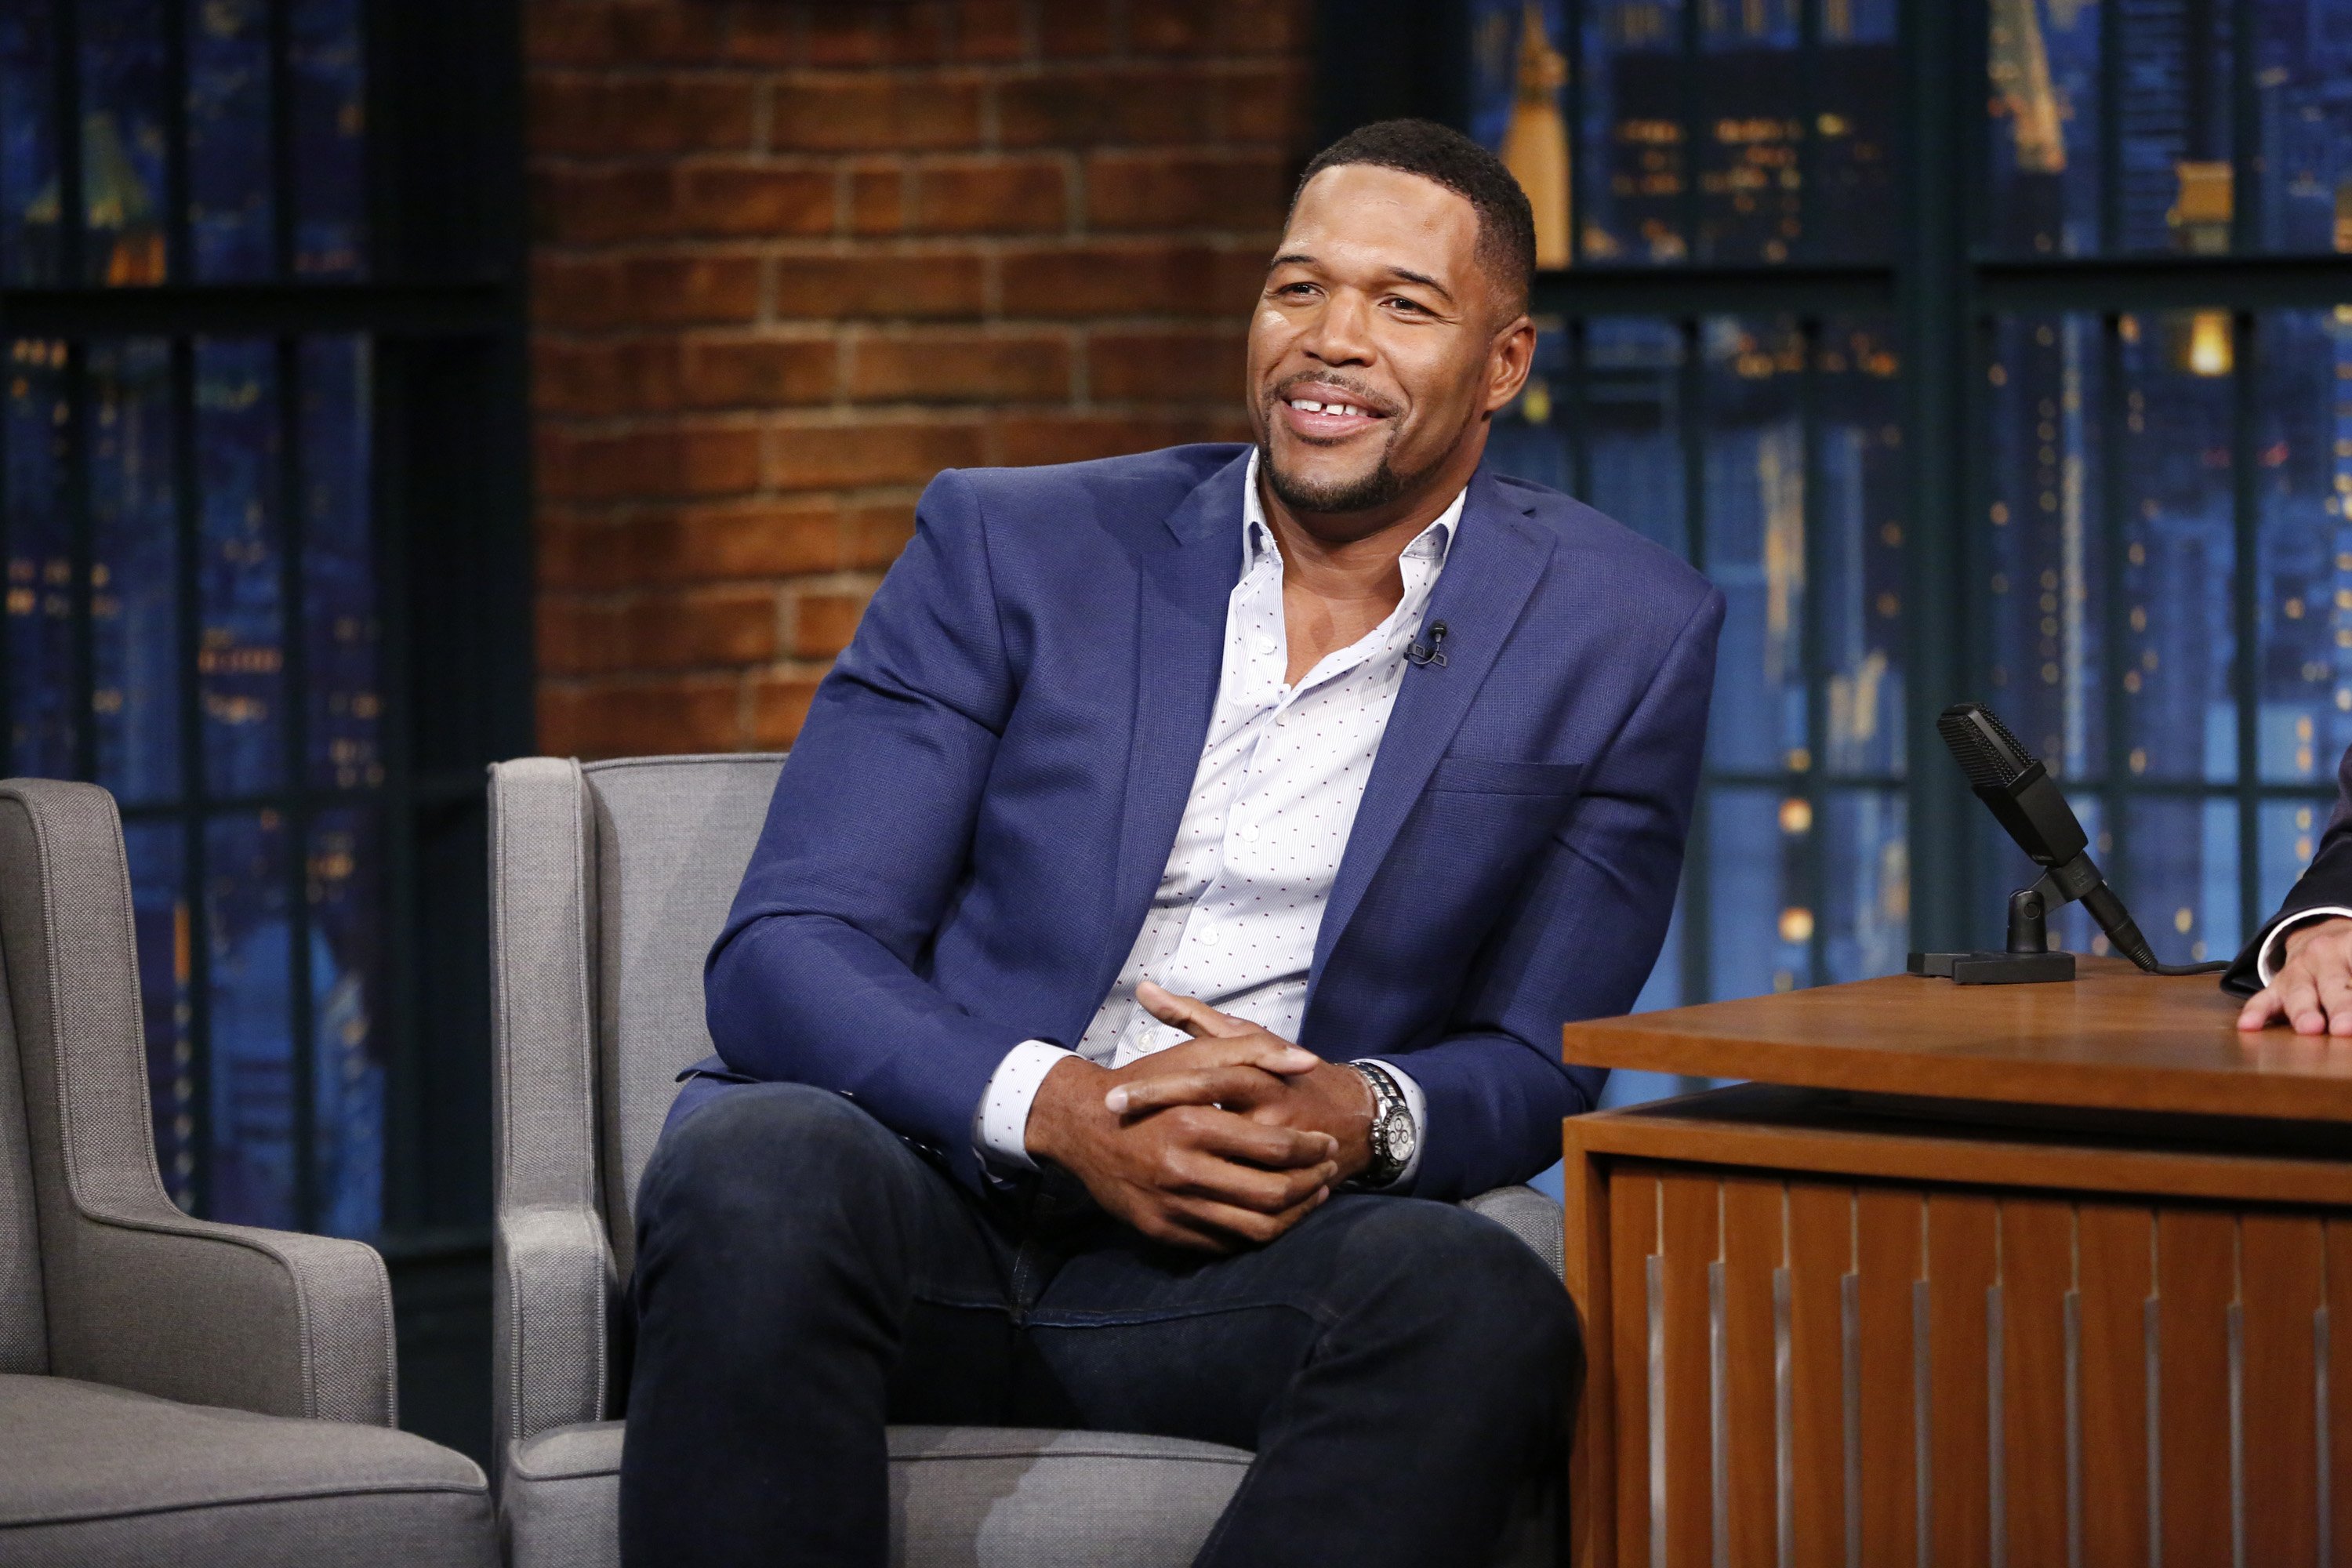 Michael Strahan during an interview on "Late Night with Seth Meyers" on October 2, 2017. | Source: Lloyd Bishop/NBCU Photo Bank/NBCUniversal via Getty Images